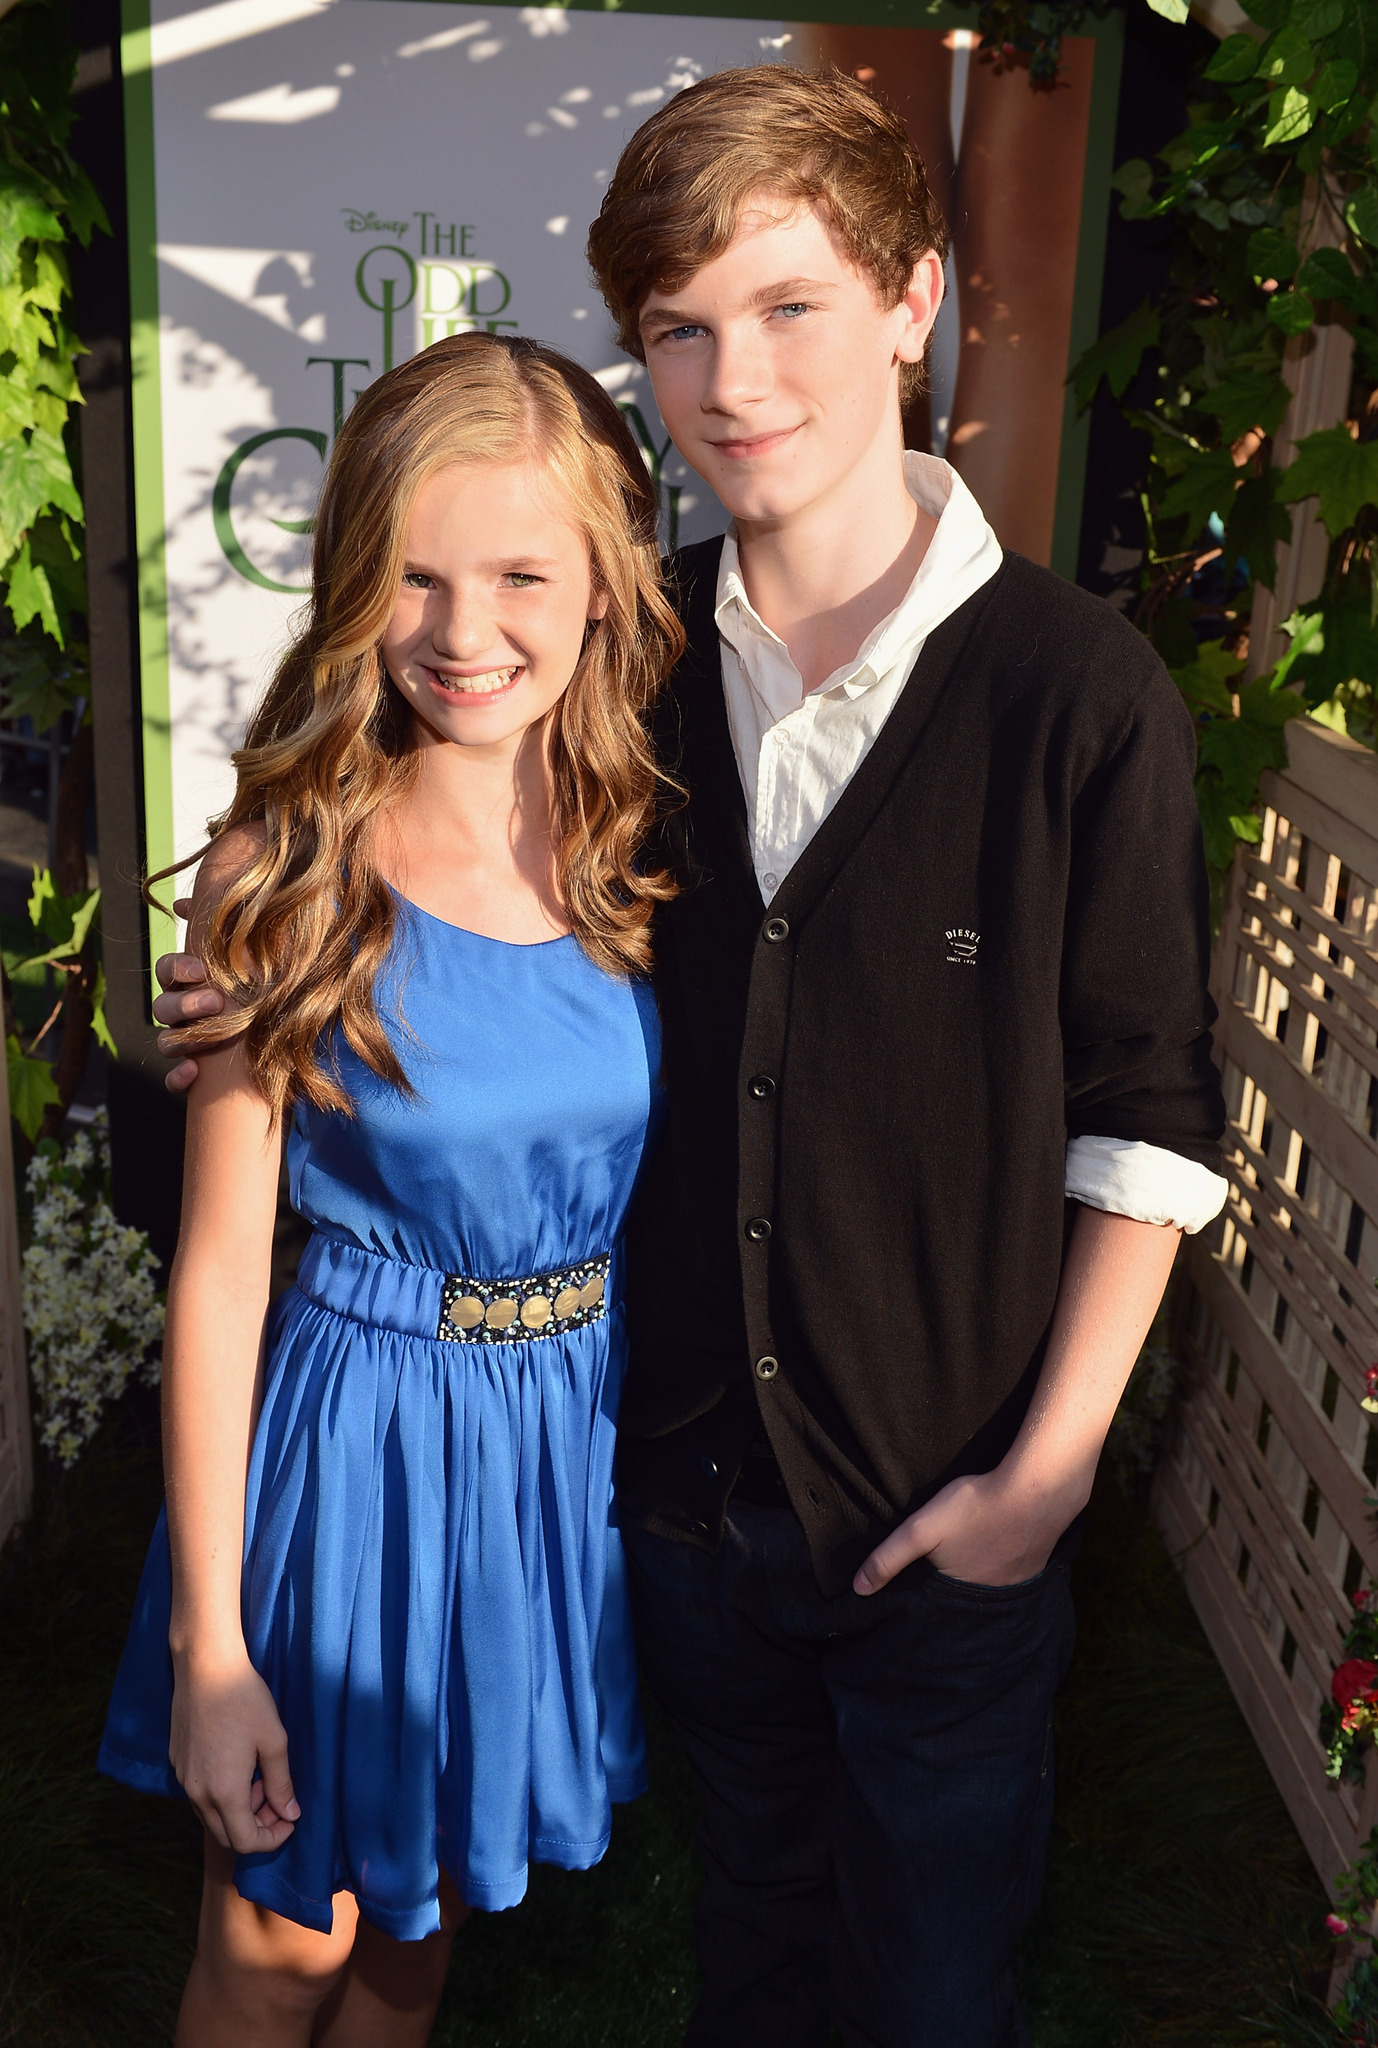 Kendall Ryan Sanders and Lucy Gebhardt at event of The Odd Life of Timothy Green (2012)